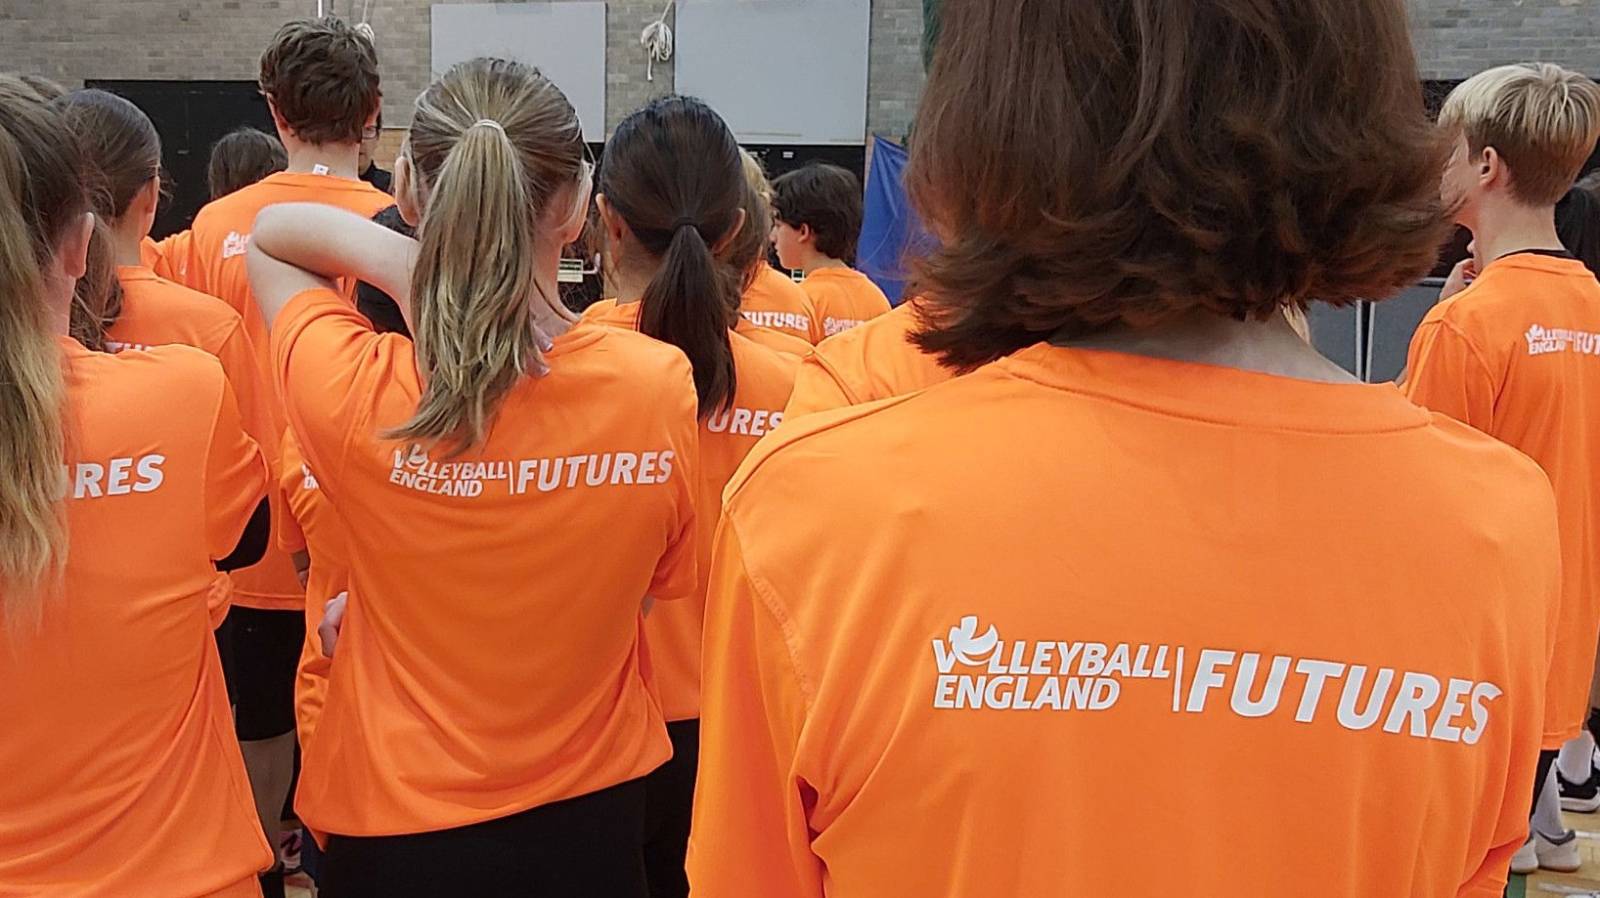 Aged 11-14? Train like an England athlete at our Volleyball Futures camp